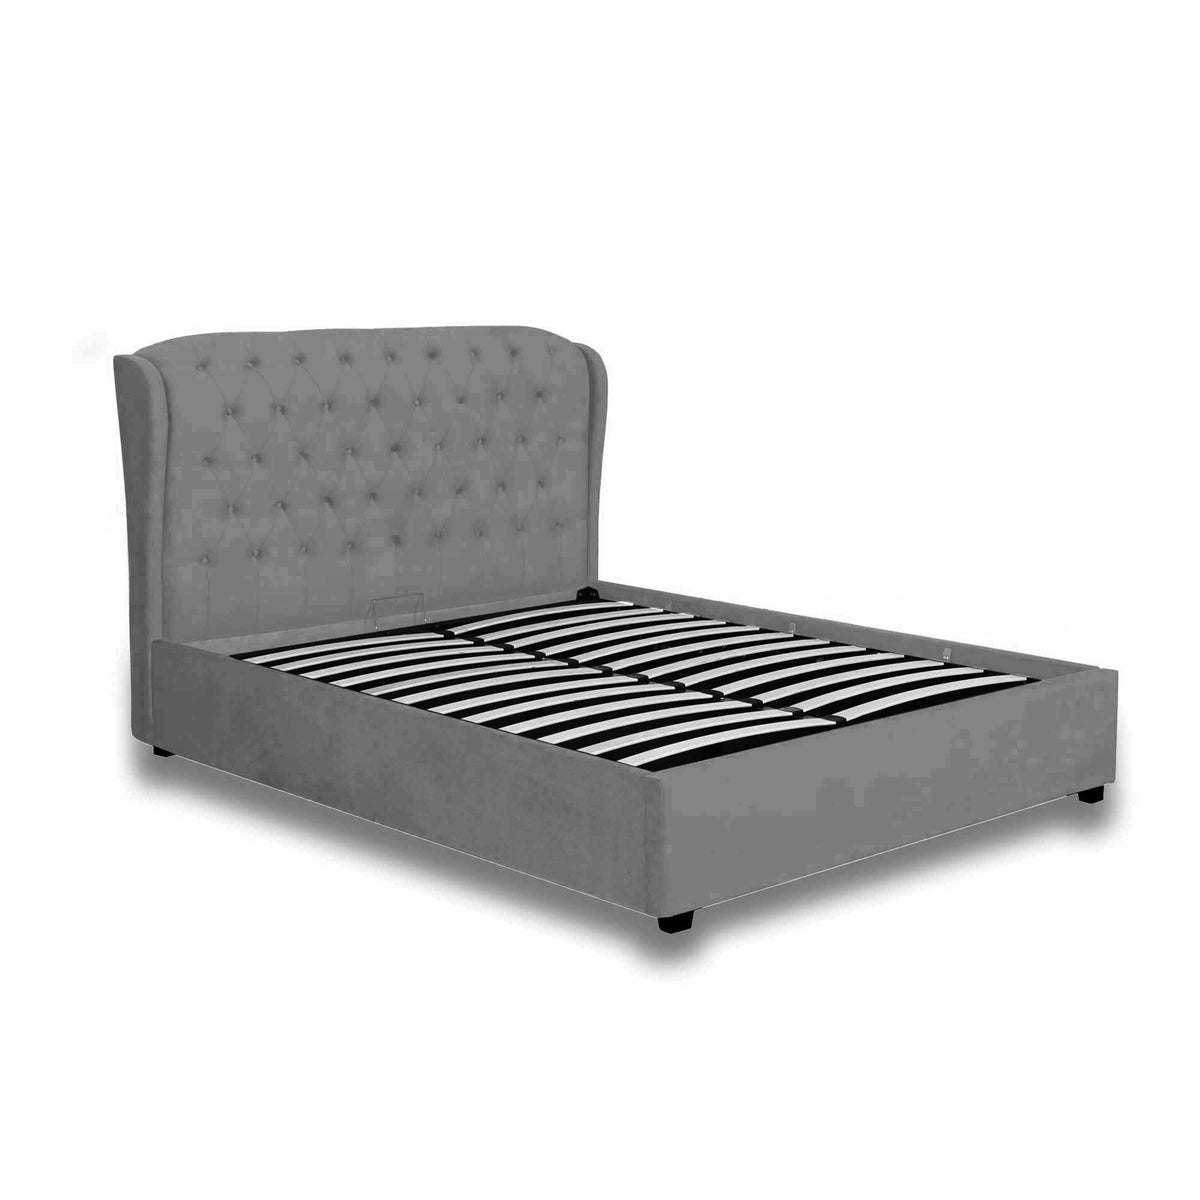 Aspen Grey Bed Frame  - 2 Sizes Available